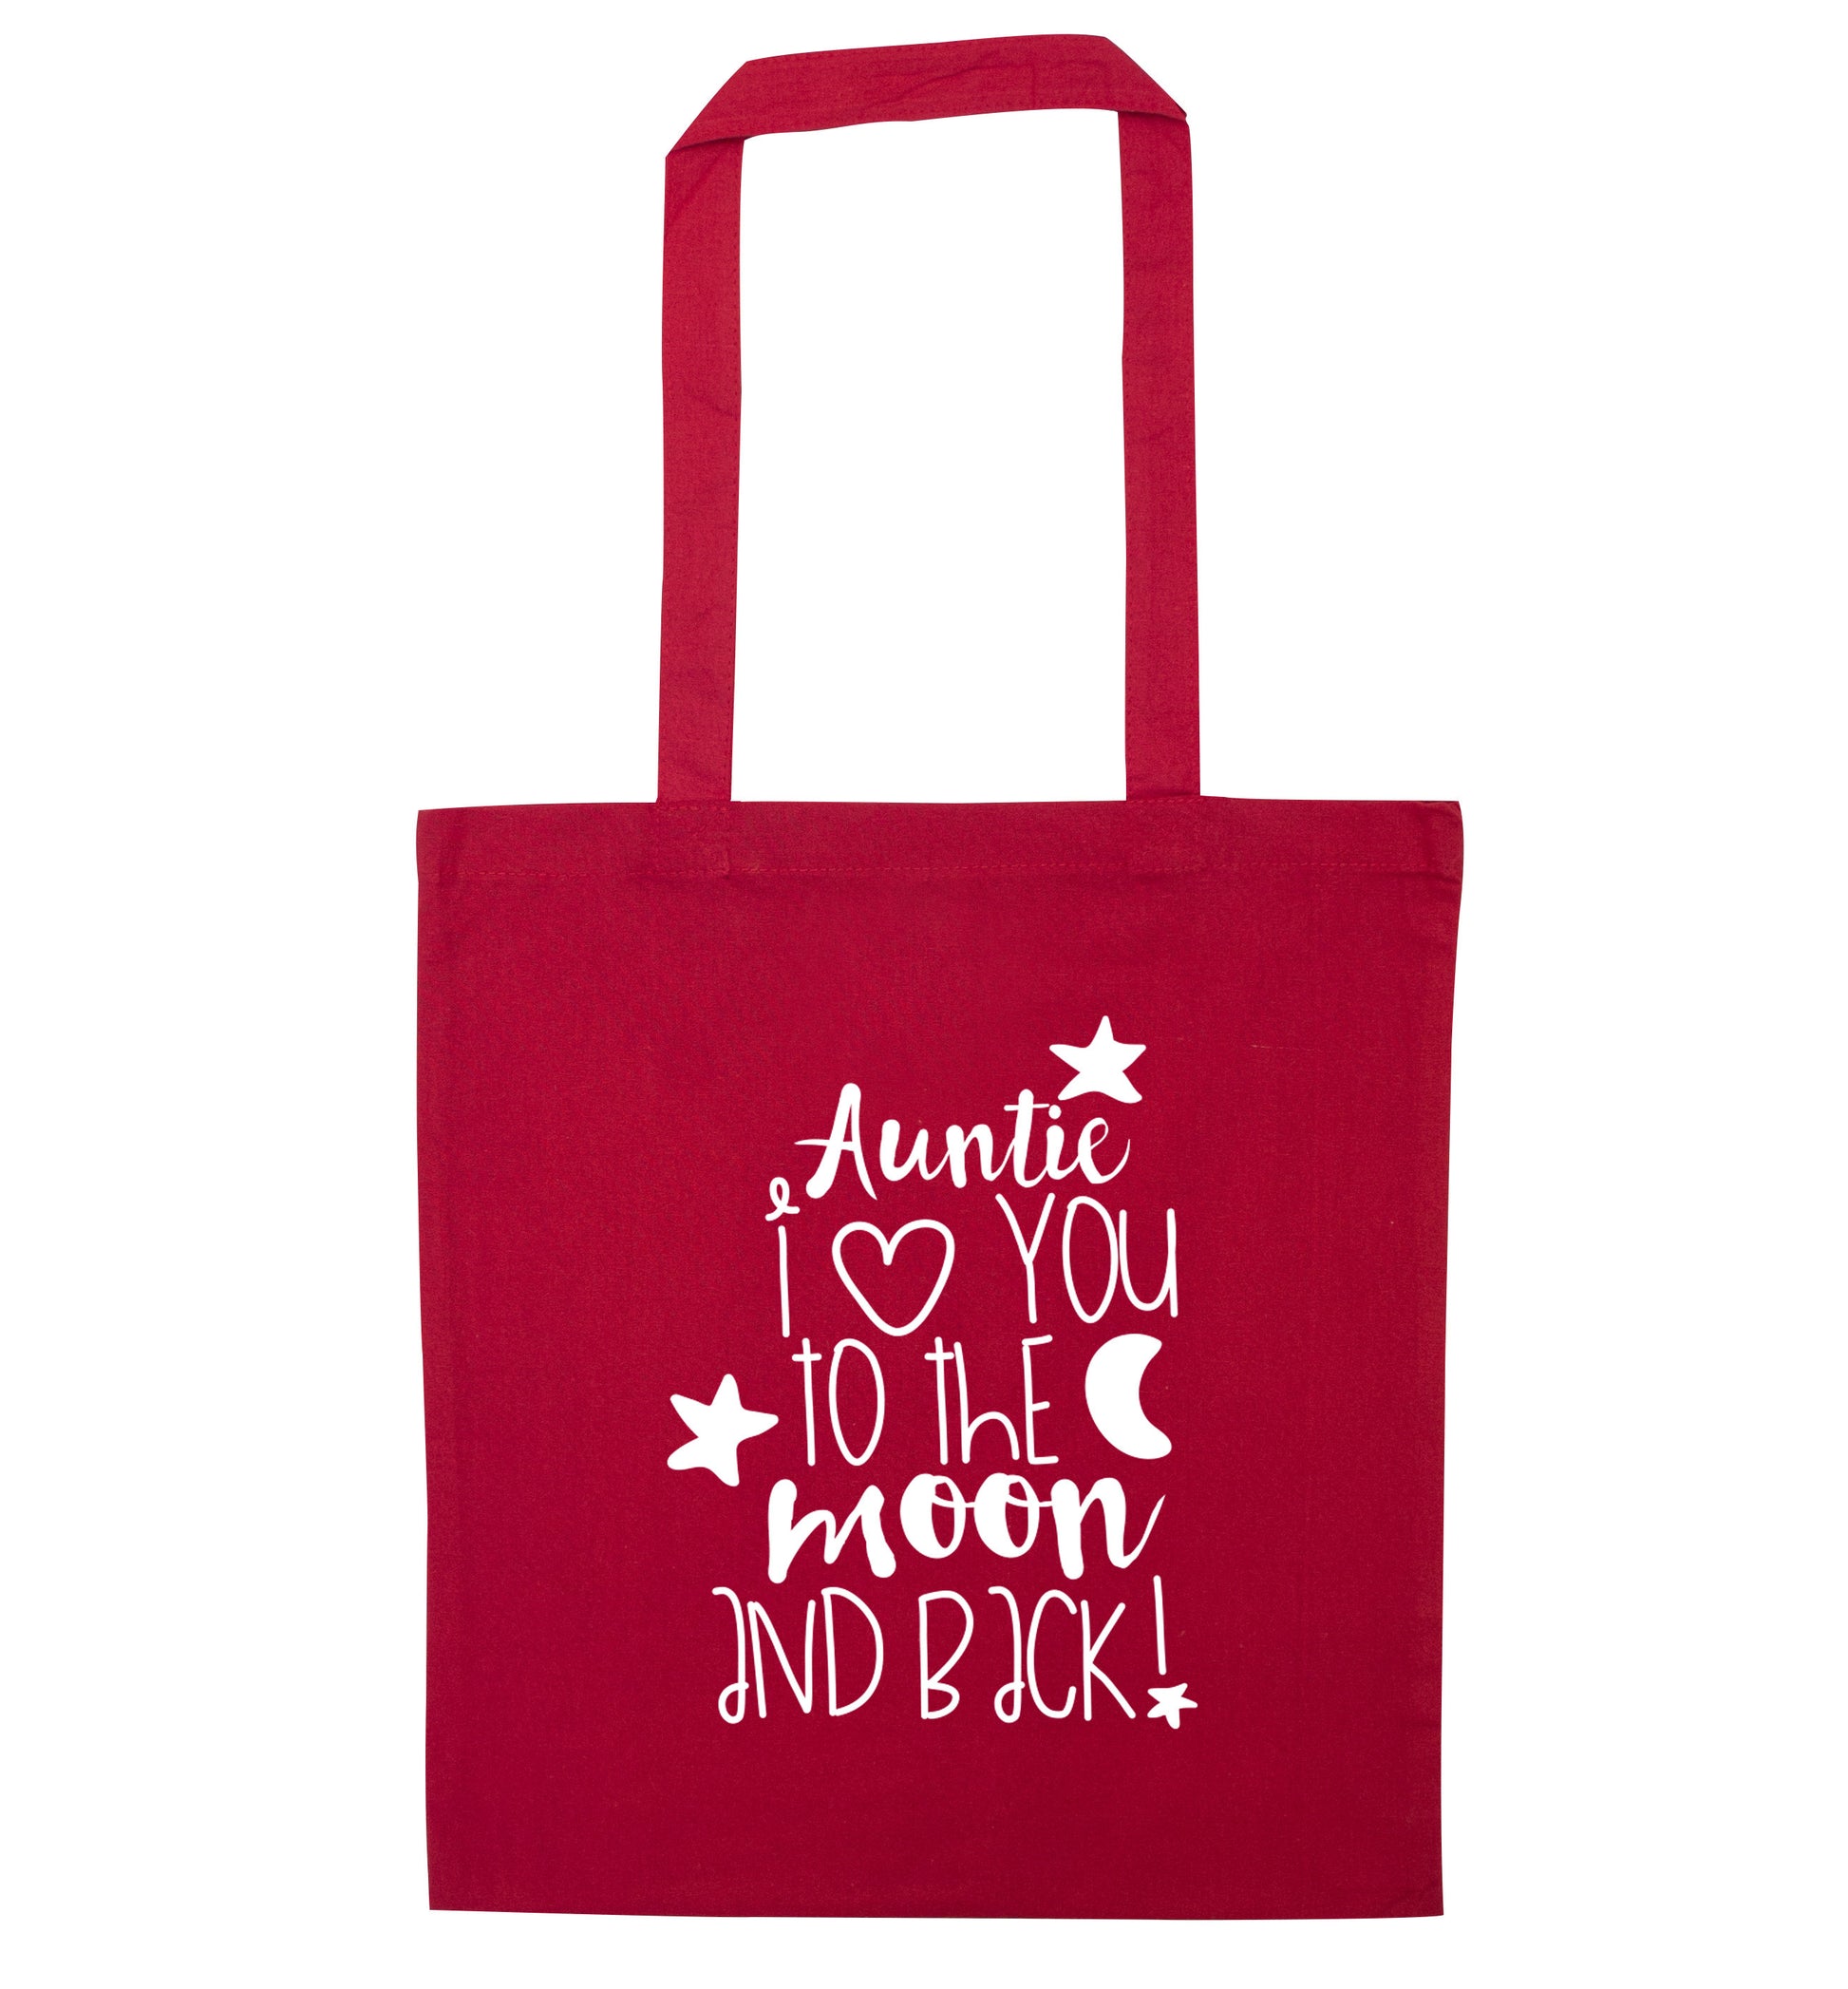 Auntie I love you to the moon and back red tote bag